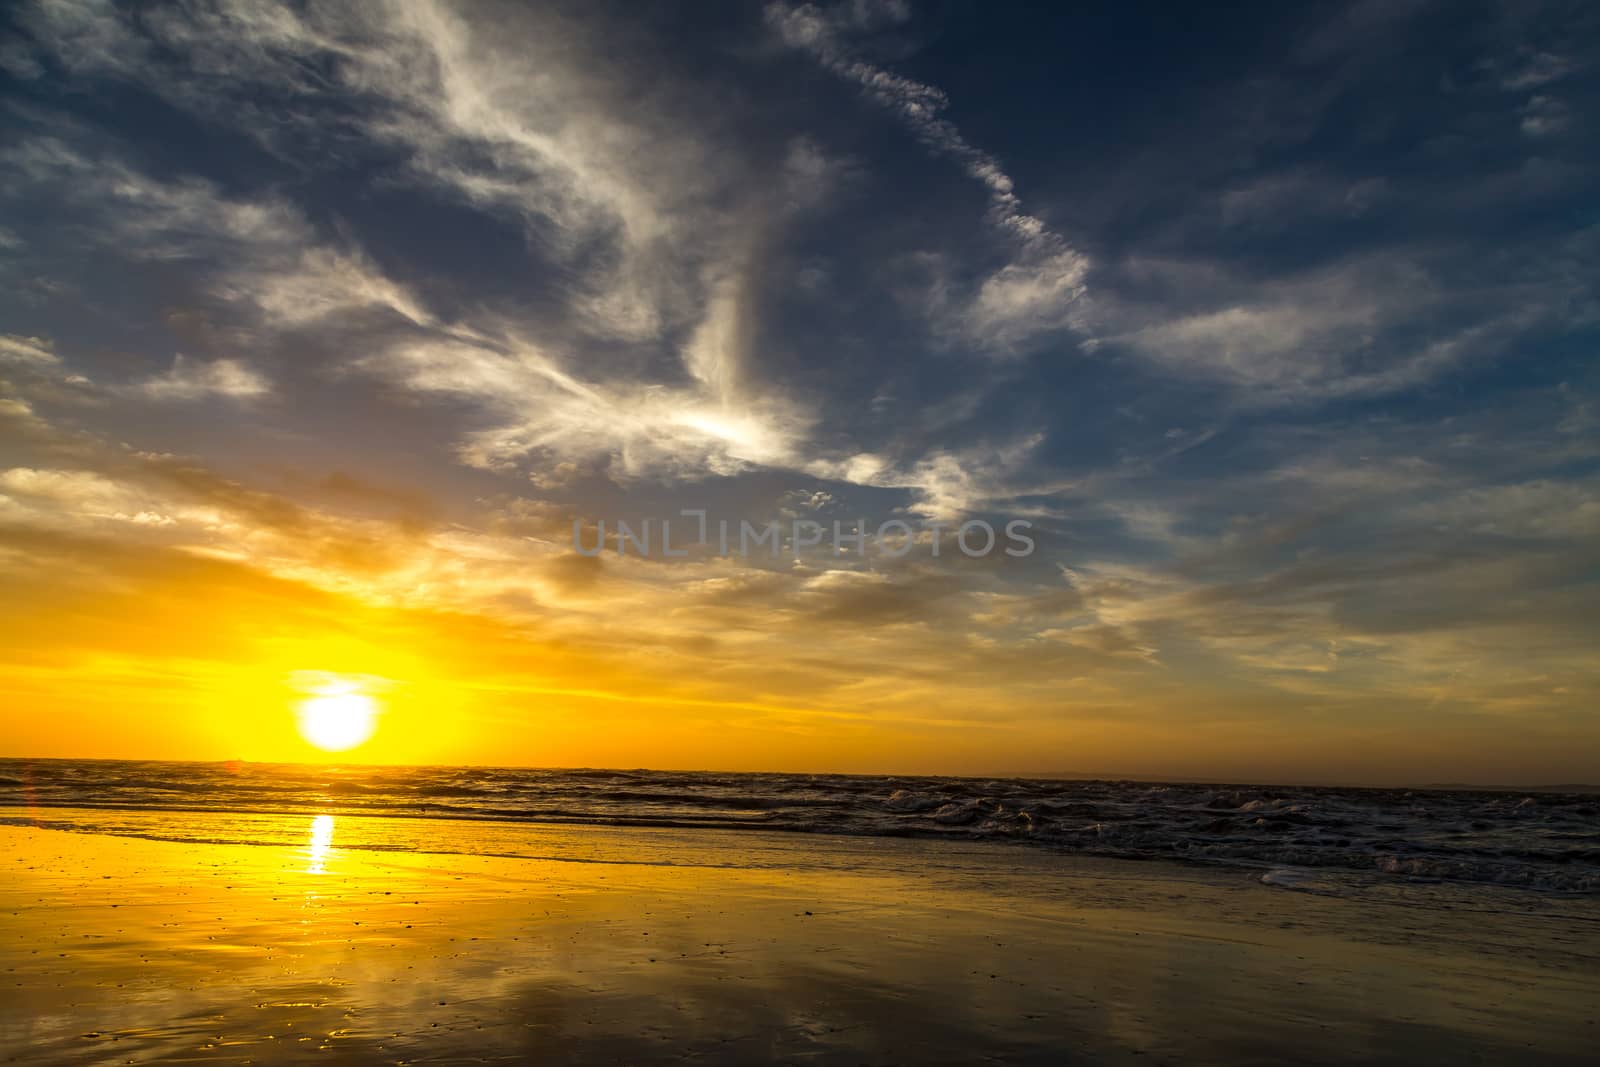 The sun rises at the beach on a cloudy morning over Amelia Island, Florida.